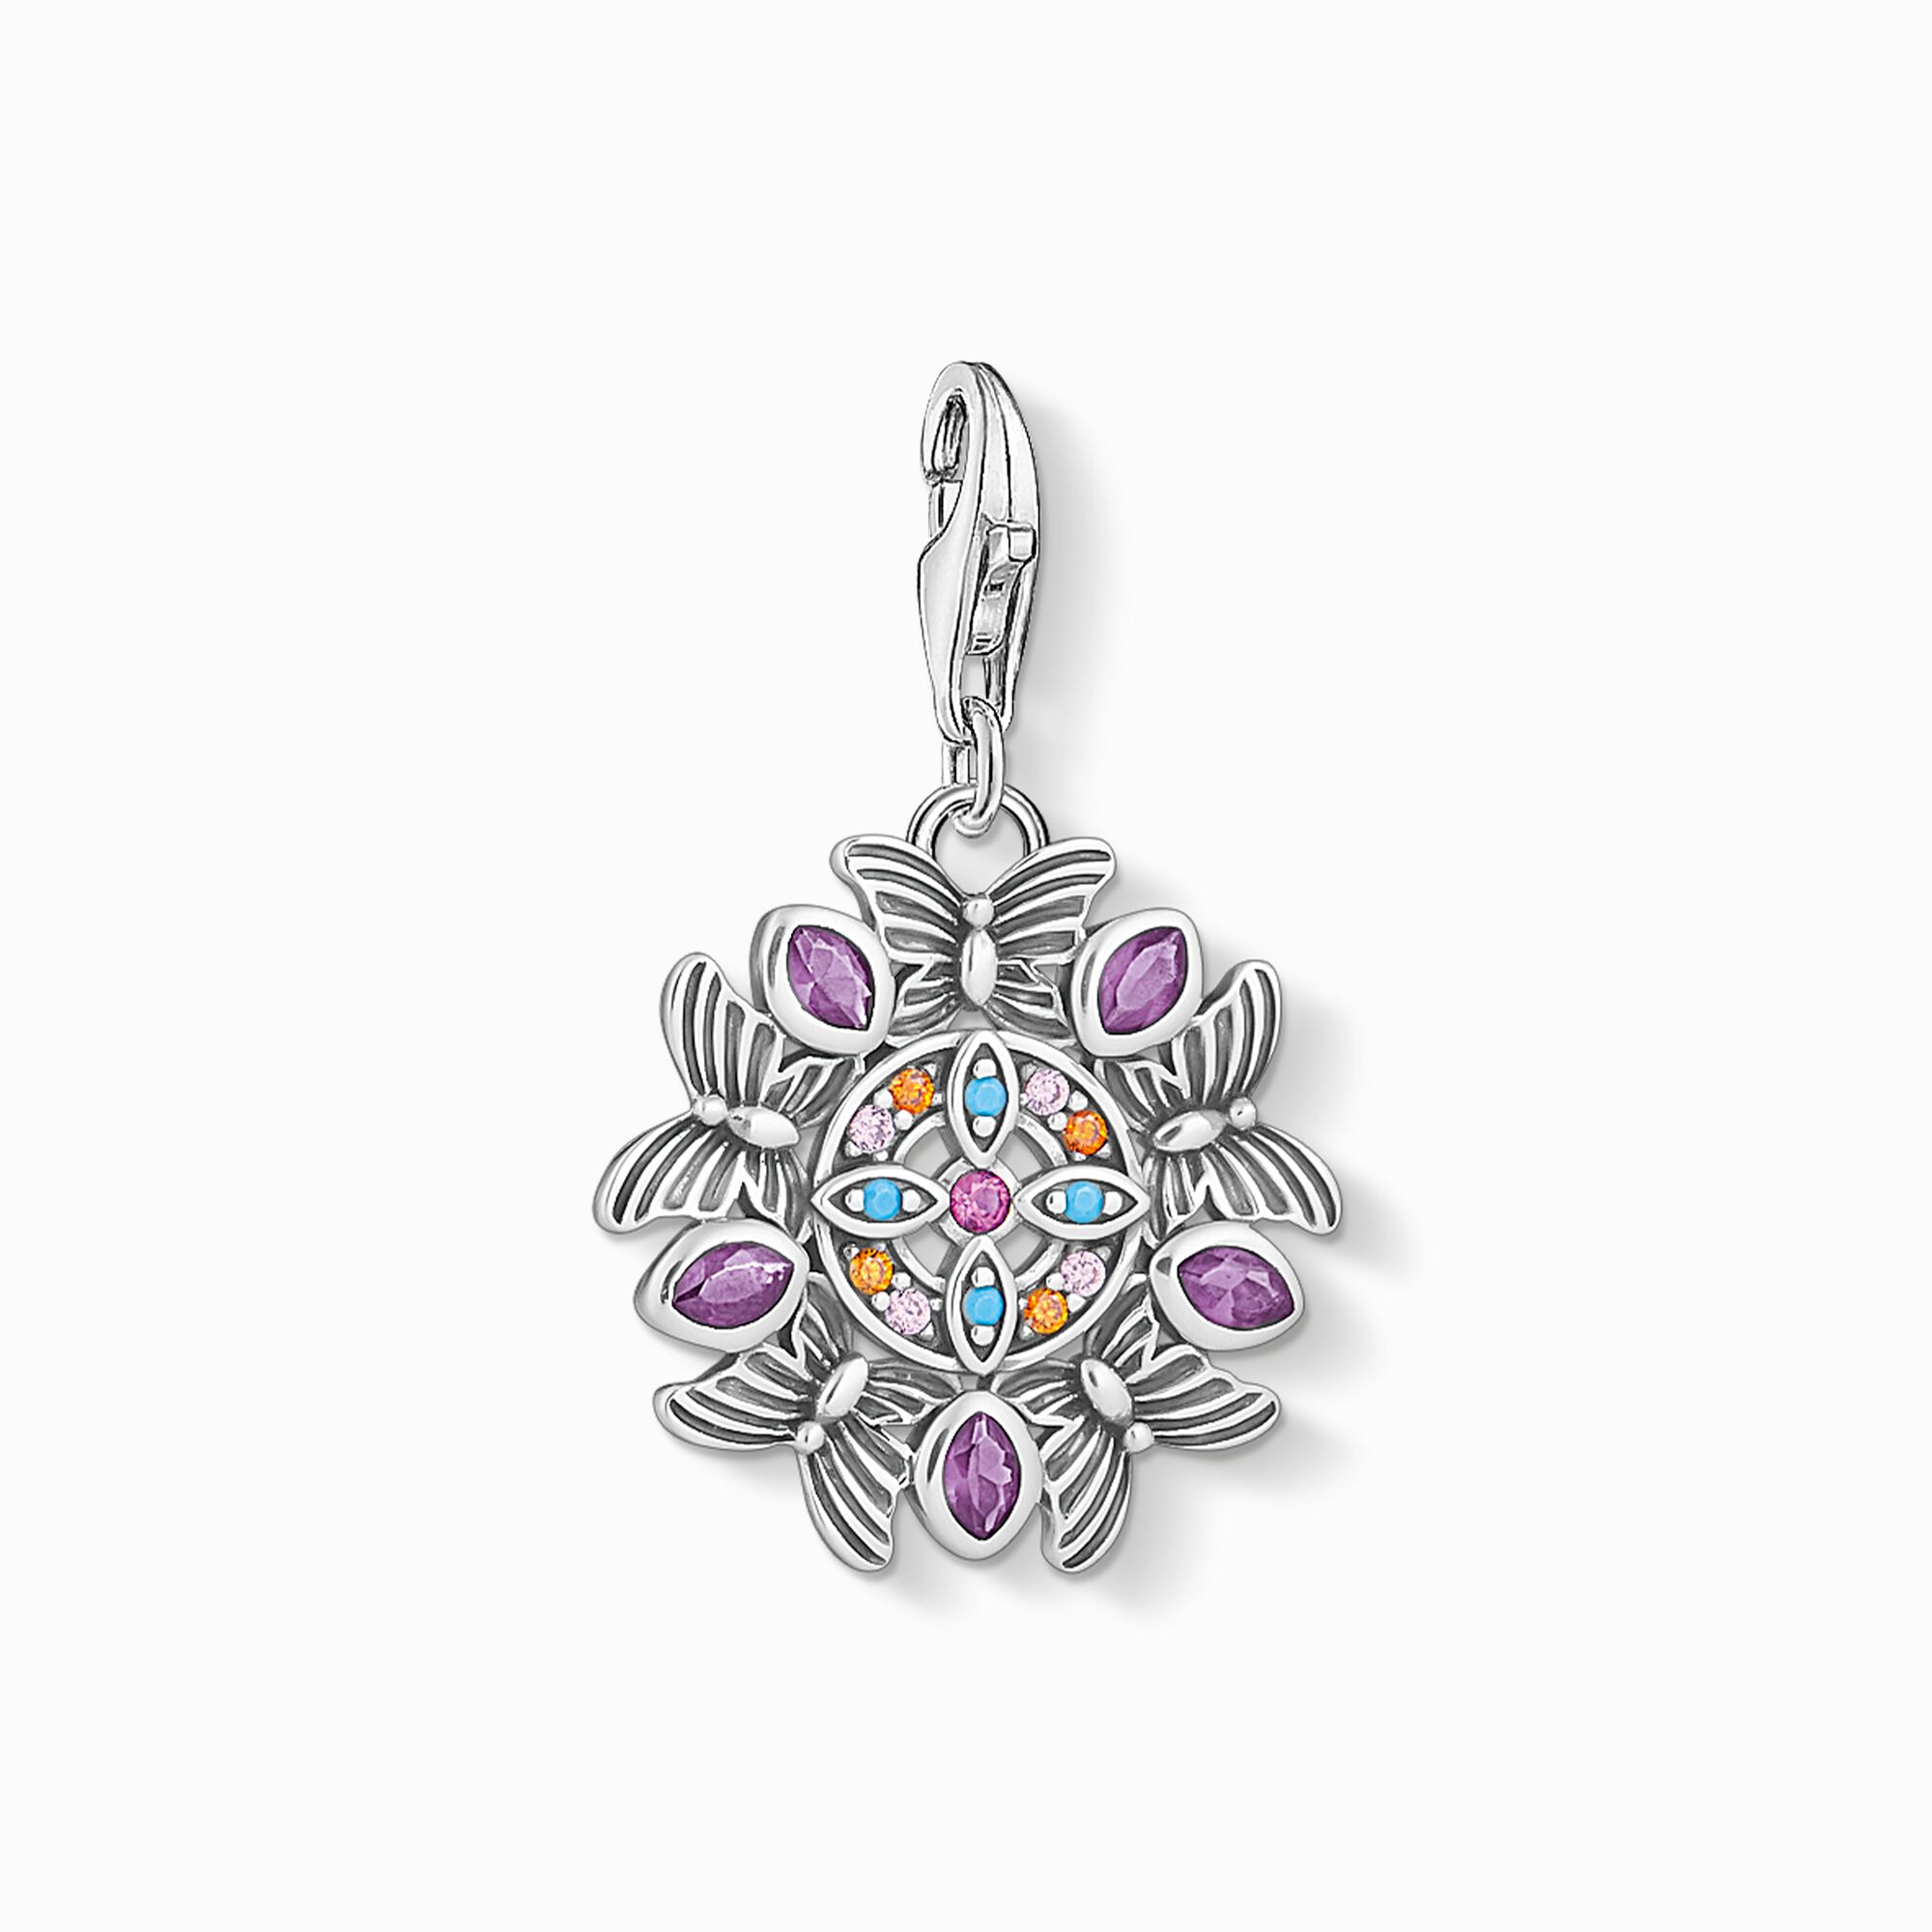 charm pendant amulet kaleidoscope silver from the Charm Club collection in the THOMAS SABO online store